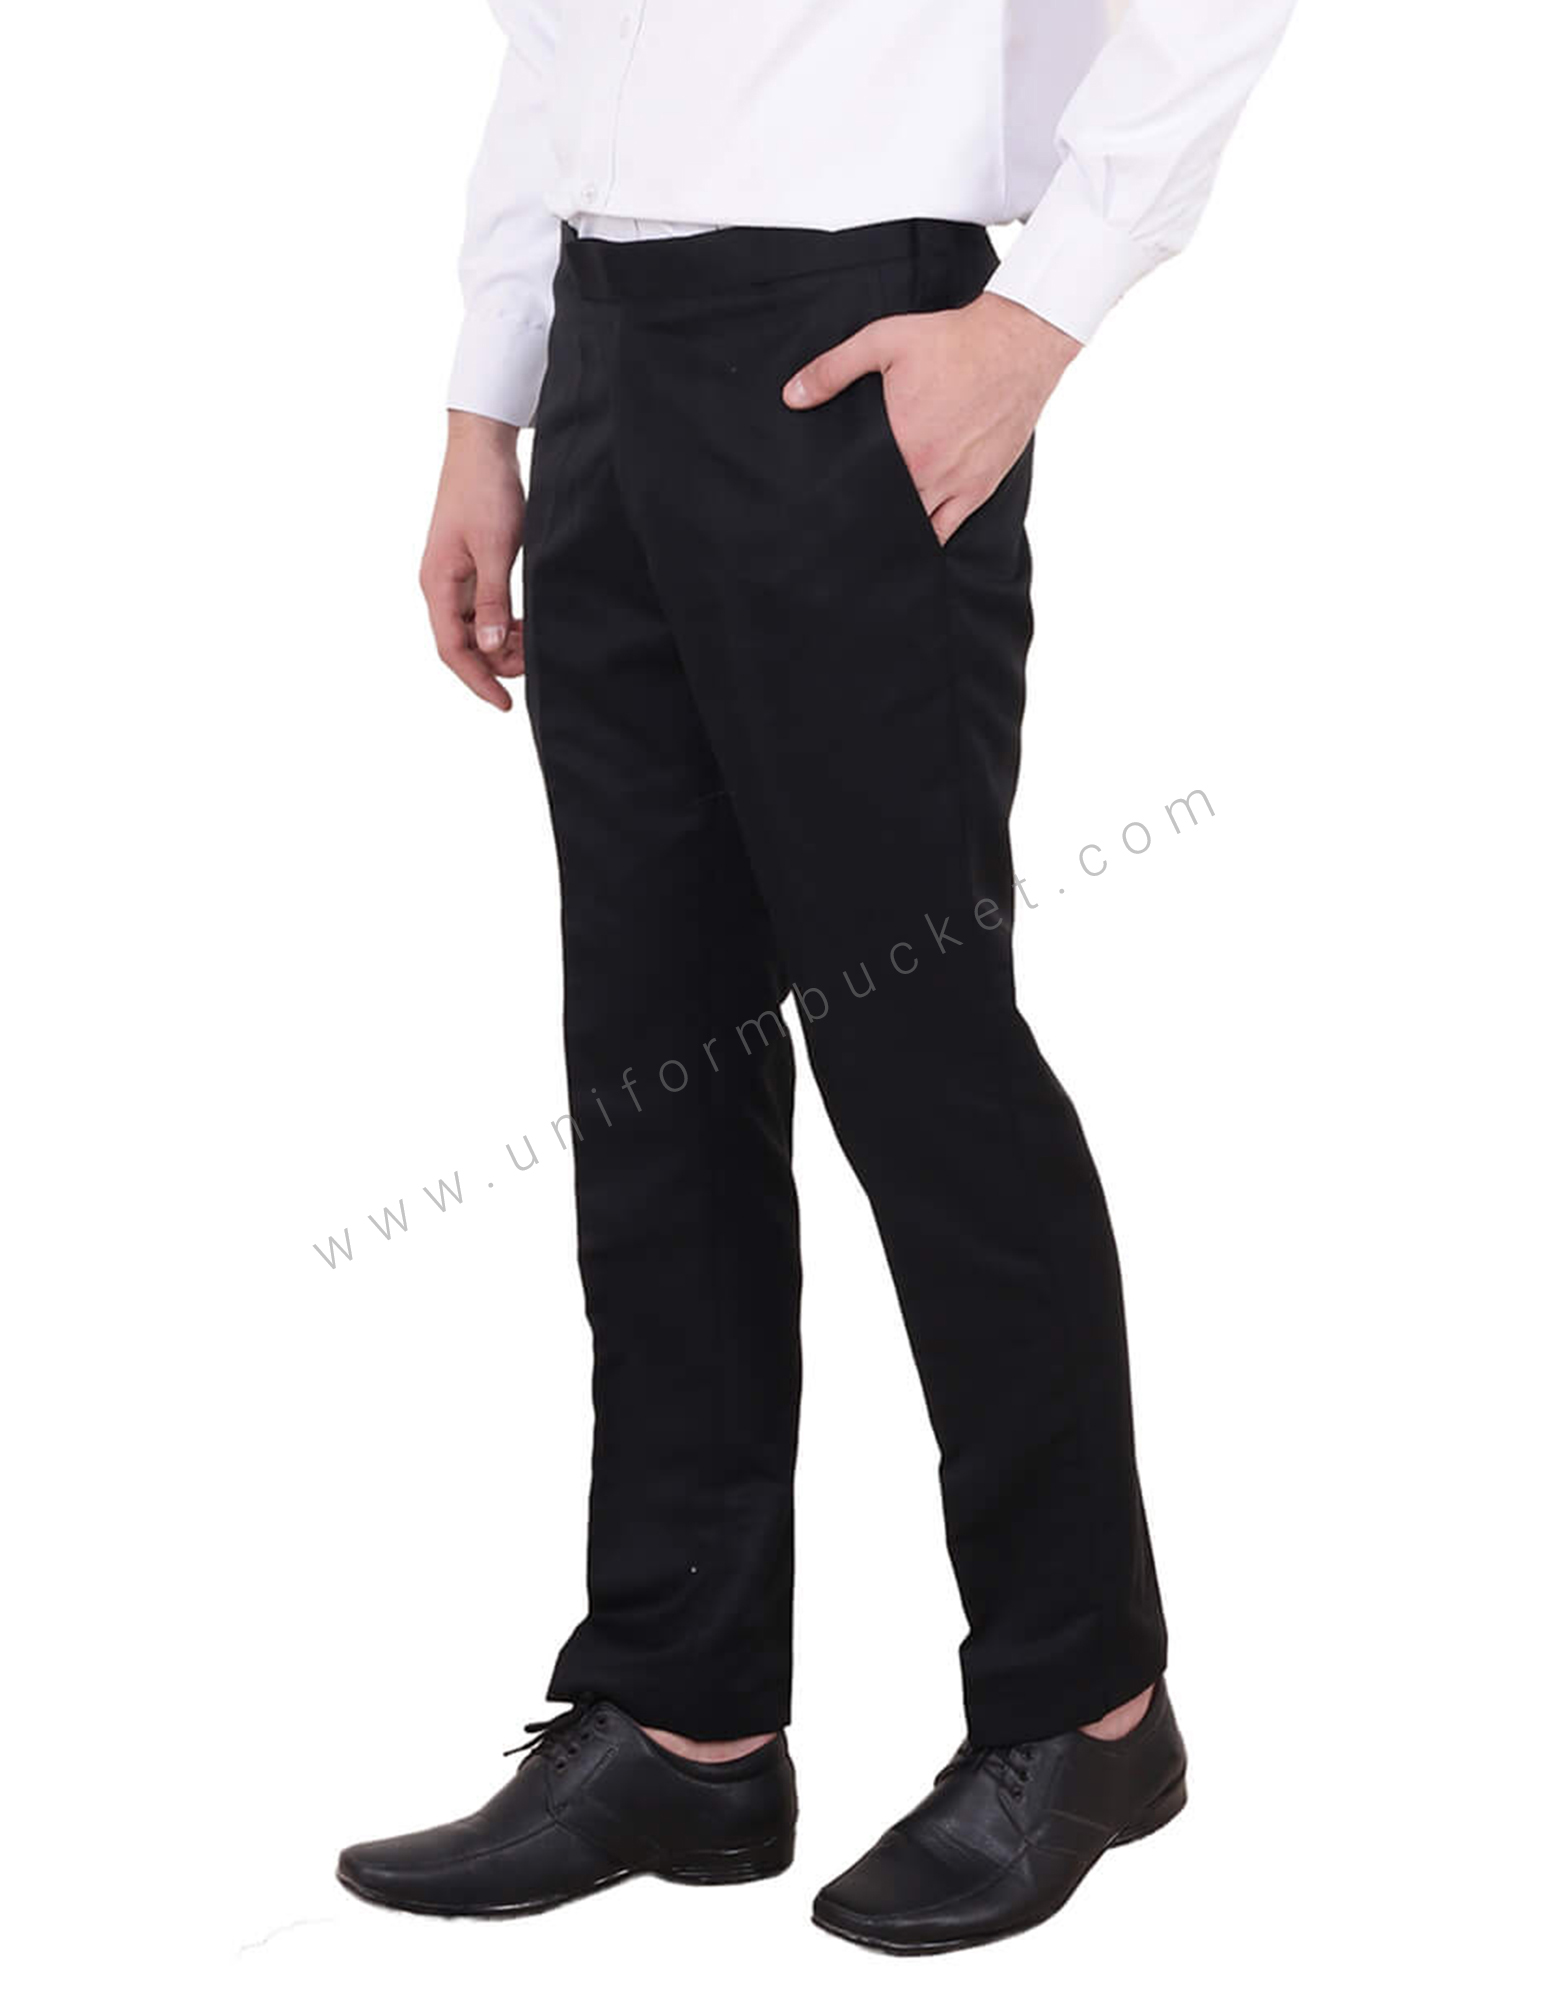 Buy Tru FESTIVO Men Slim Fit Polyester Blend Formal Trousers Combo |  Comfortable,Formal Trouser for Men | Formal Pant for Office, Travel,  Meeting, Interview, Gifting | Biege& Dark Grey | 30 at Amazon.in